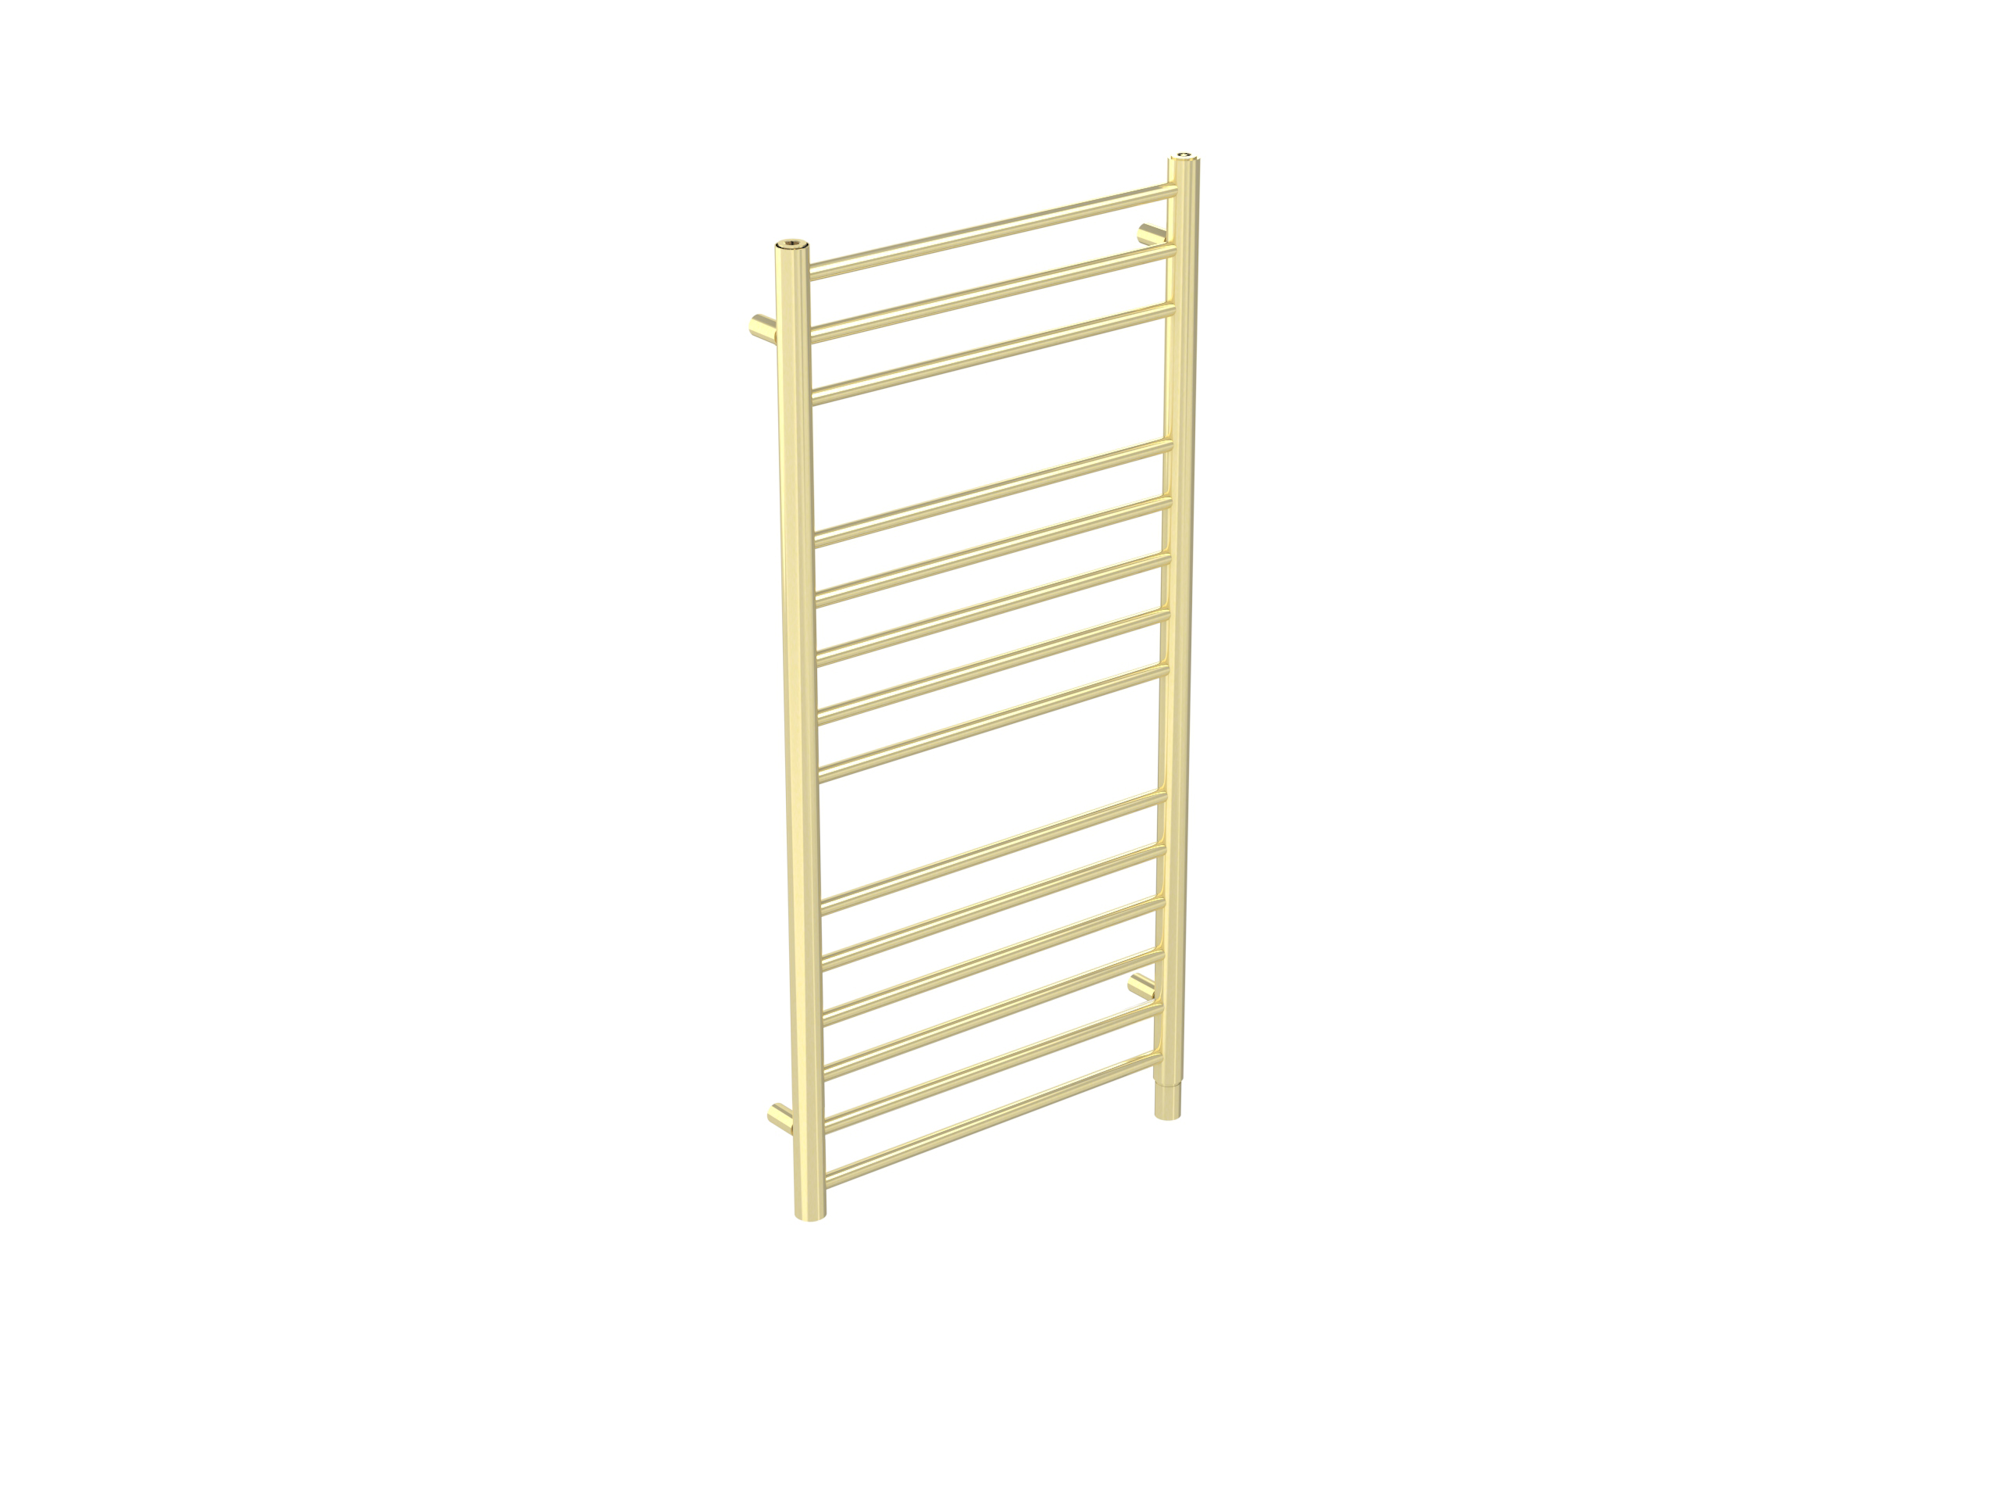 EMBER 1000x500mm pre-filled towel rail - Brushed Brass